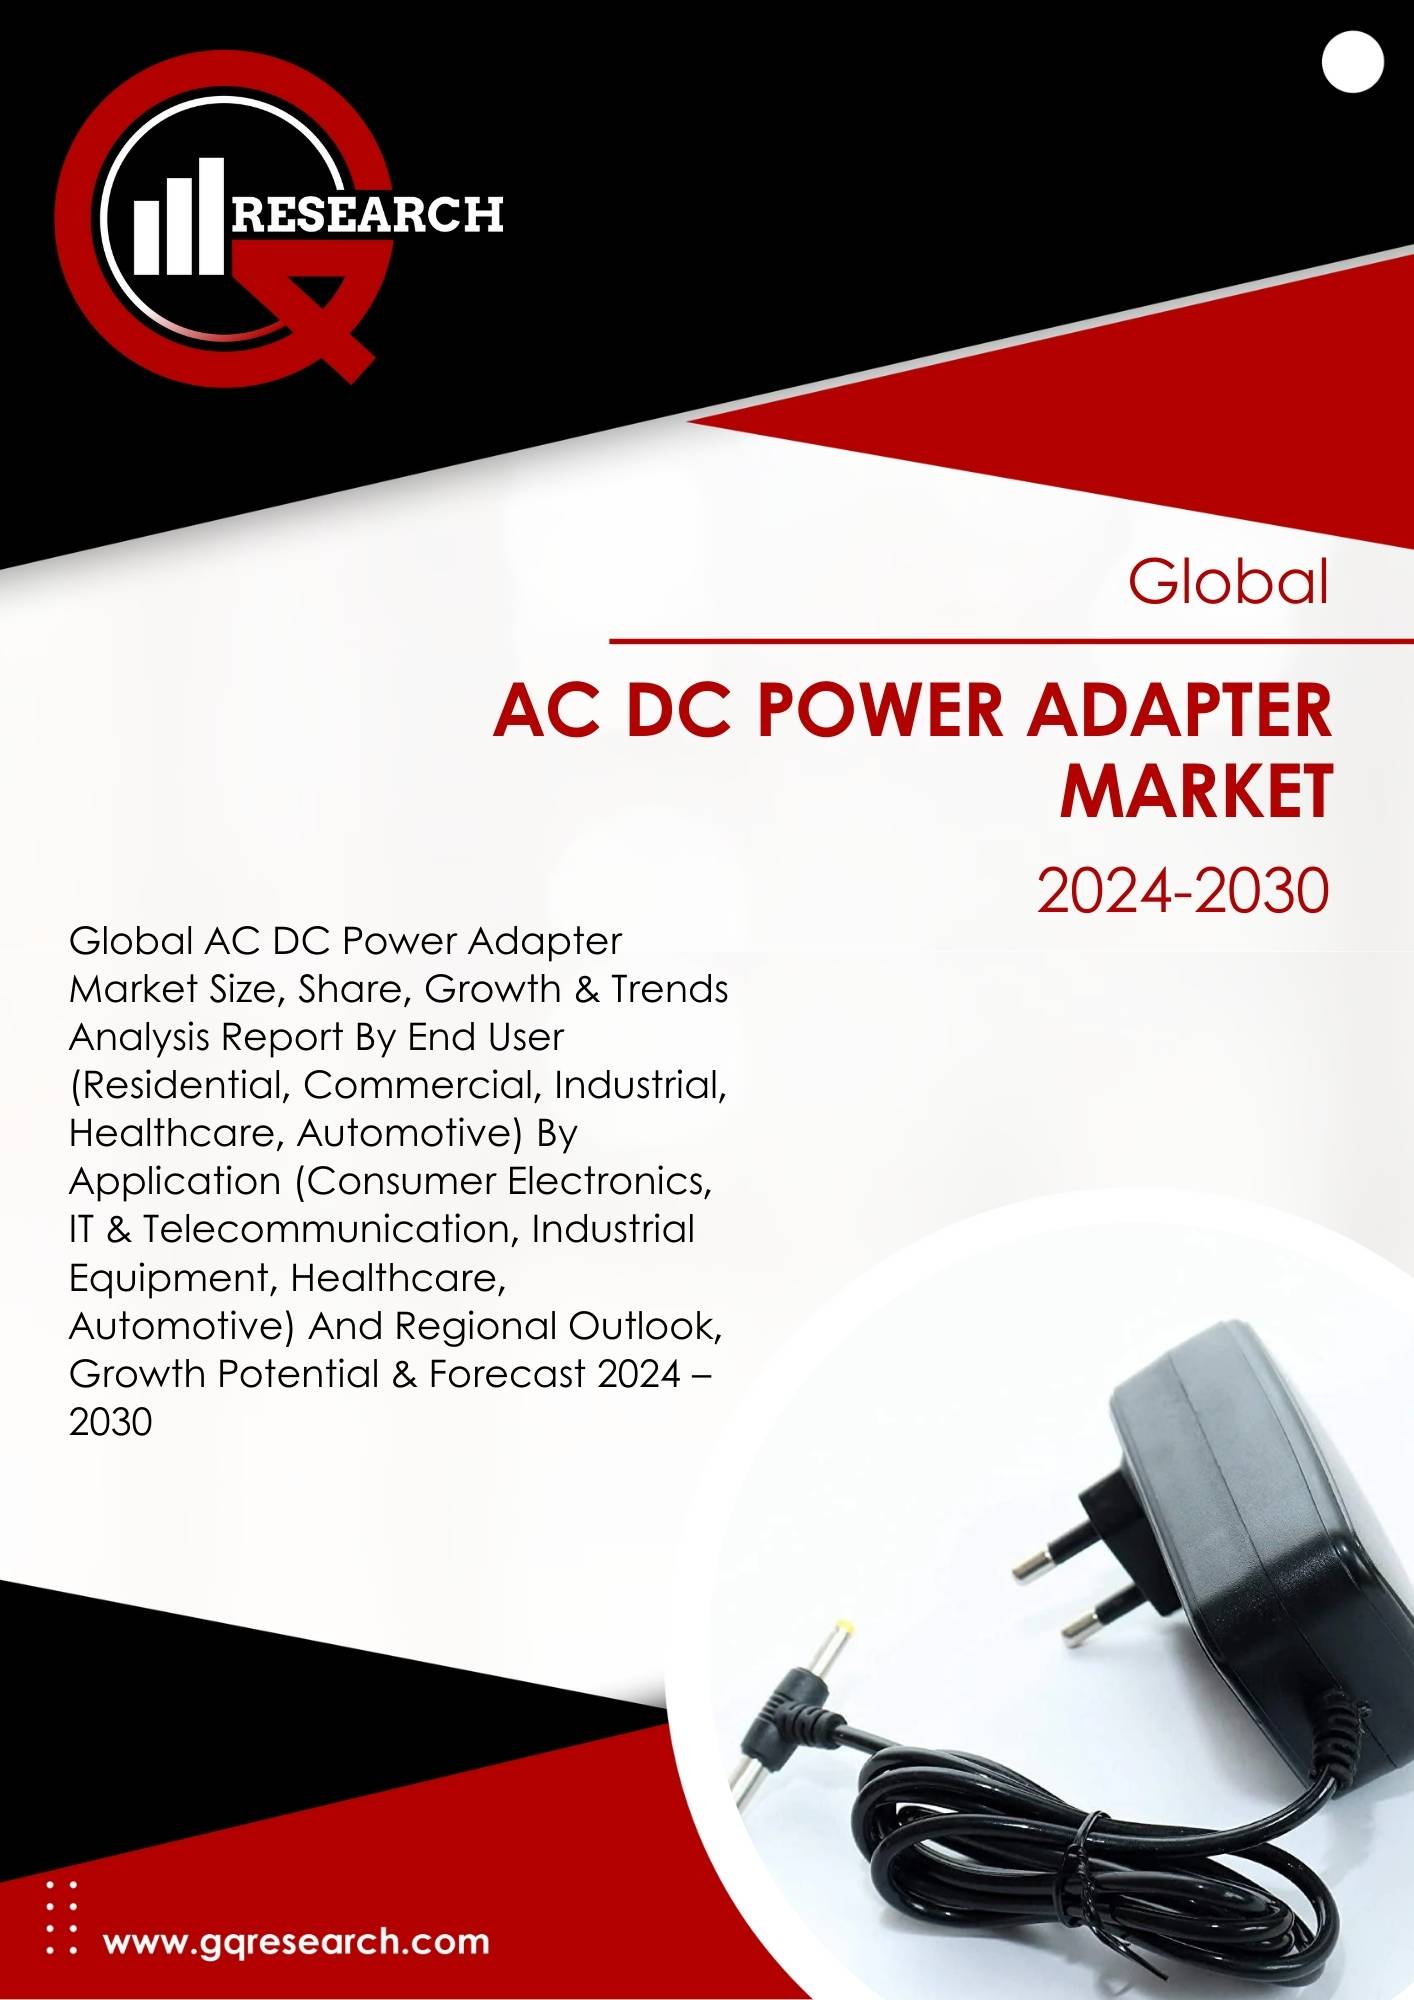 AC DC Power Adapter Market Growth Analysis and Forecast to 2030 | GQ Research